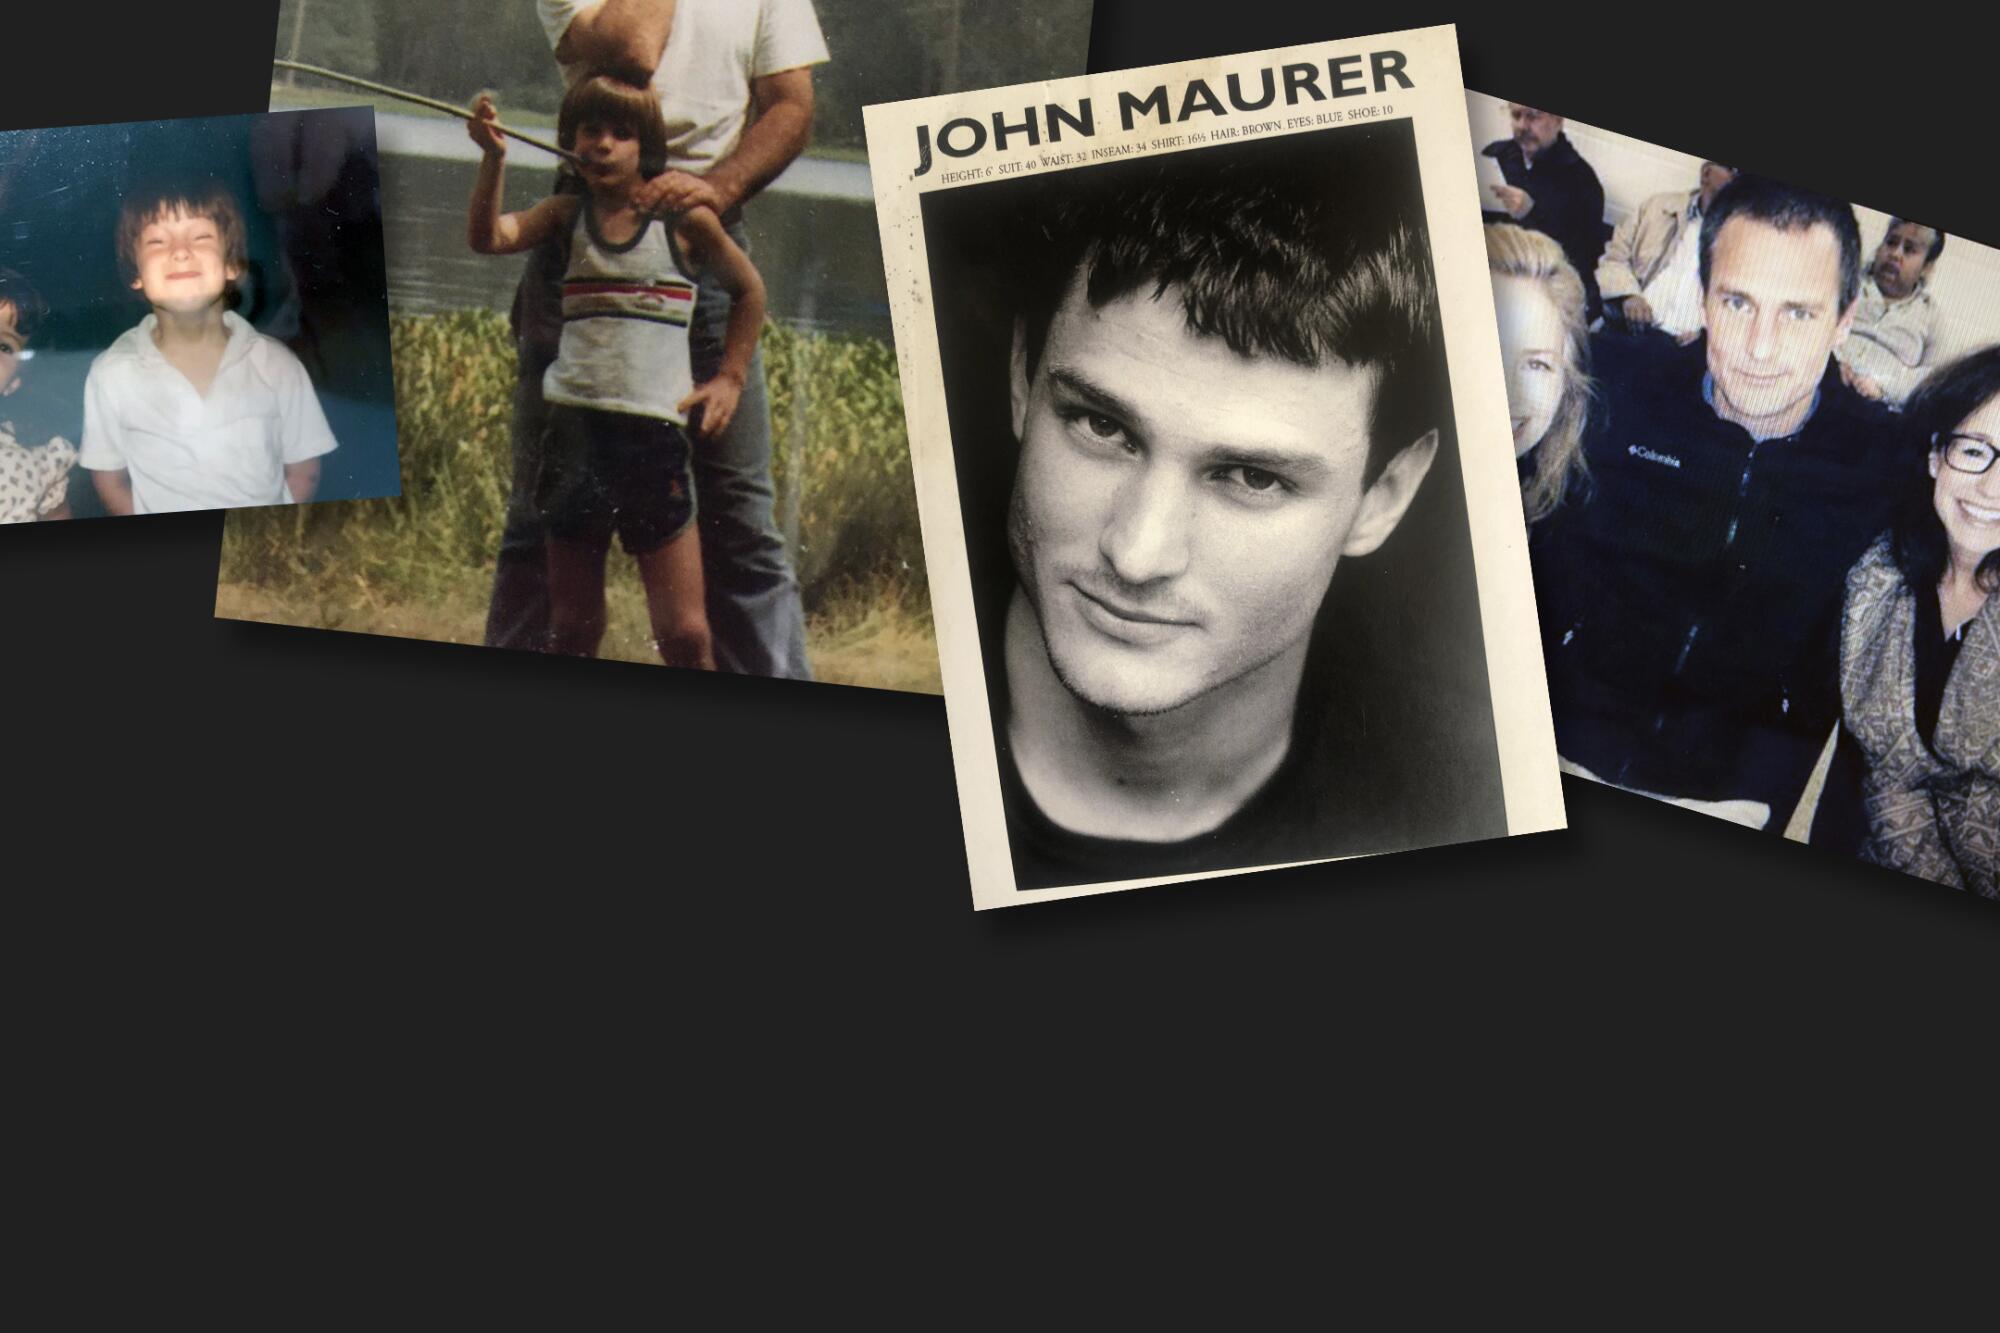 Photos of John Maurer as a child and adult